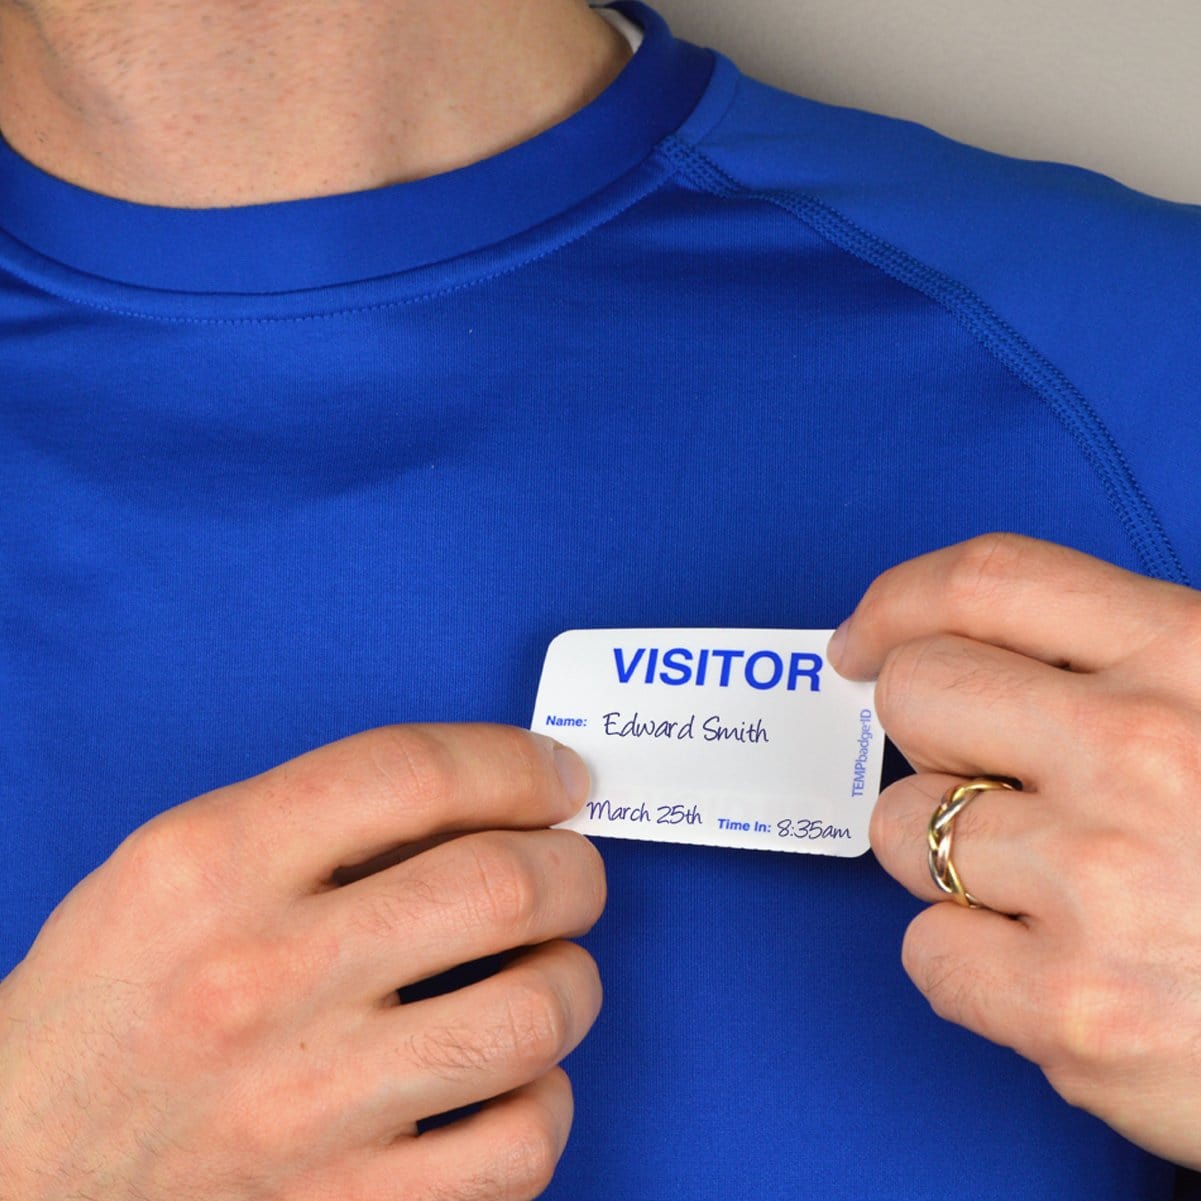 A person wearing a blue shirt is attaching an Expiring Visitor Badge and Log Book - 480 Badges (05741) to their chest that reads "Name: Edward Smith, March 25th, Time in: 9:35 AM," efficiently noted by the visitor management system.